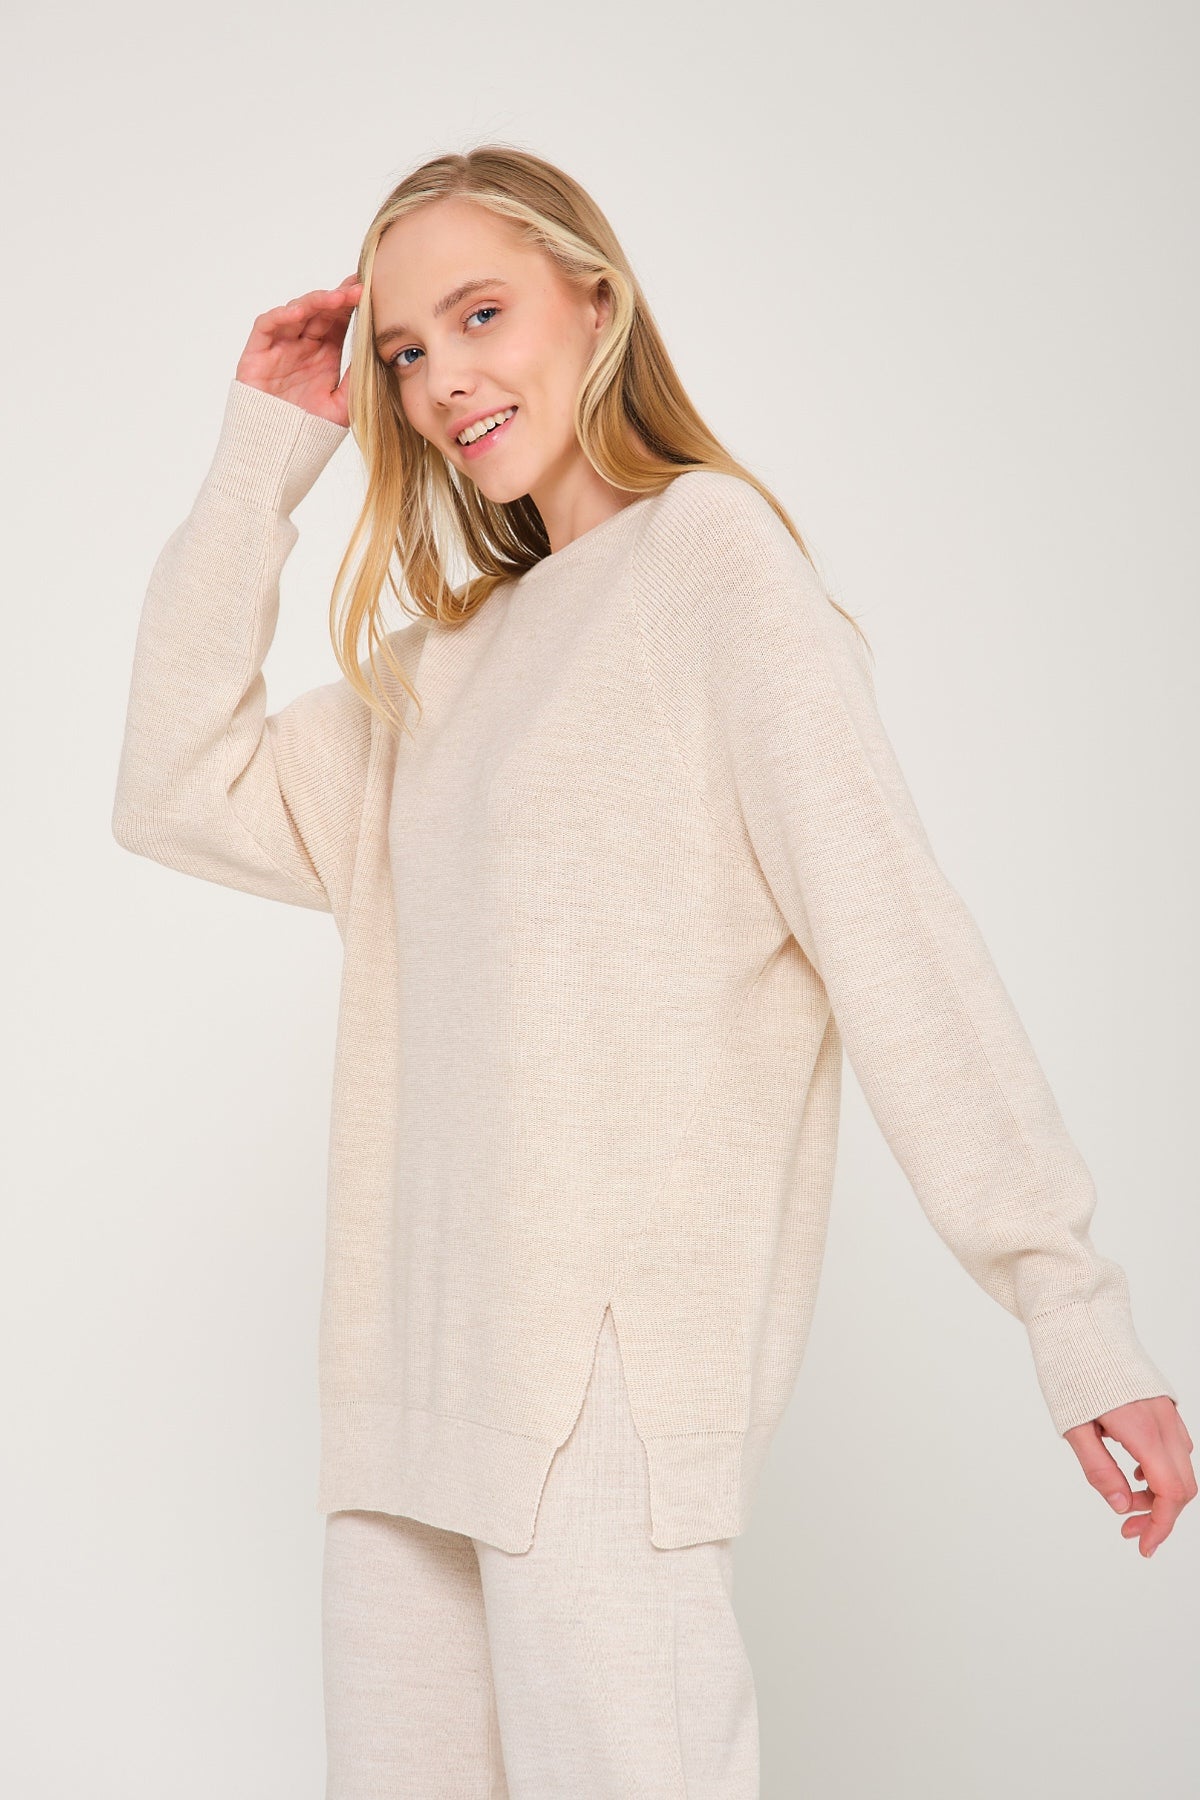 ADAGRO Cozy Sweater Drop Shoulder Cable Knit Sweater & Knit Pants (Color :  Beige, Size : Small) : : Clothing, Shoes & Accessories